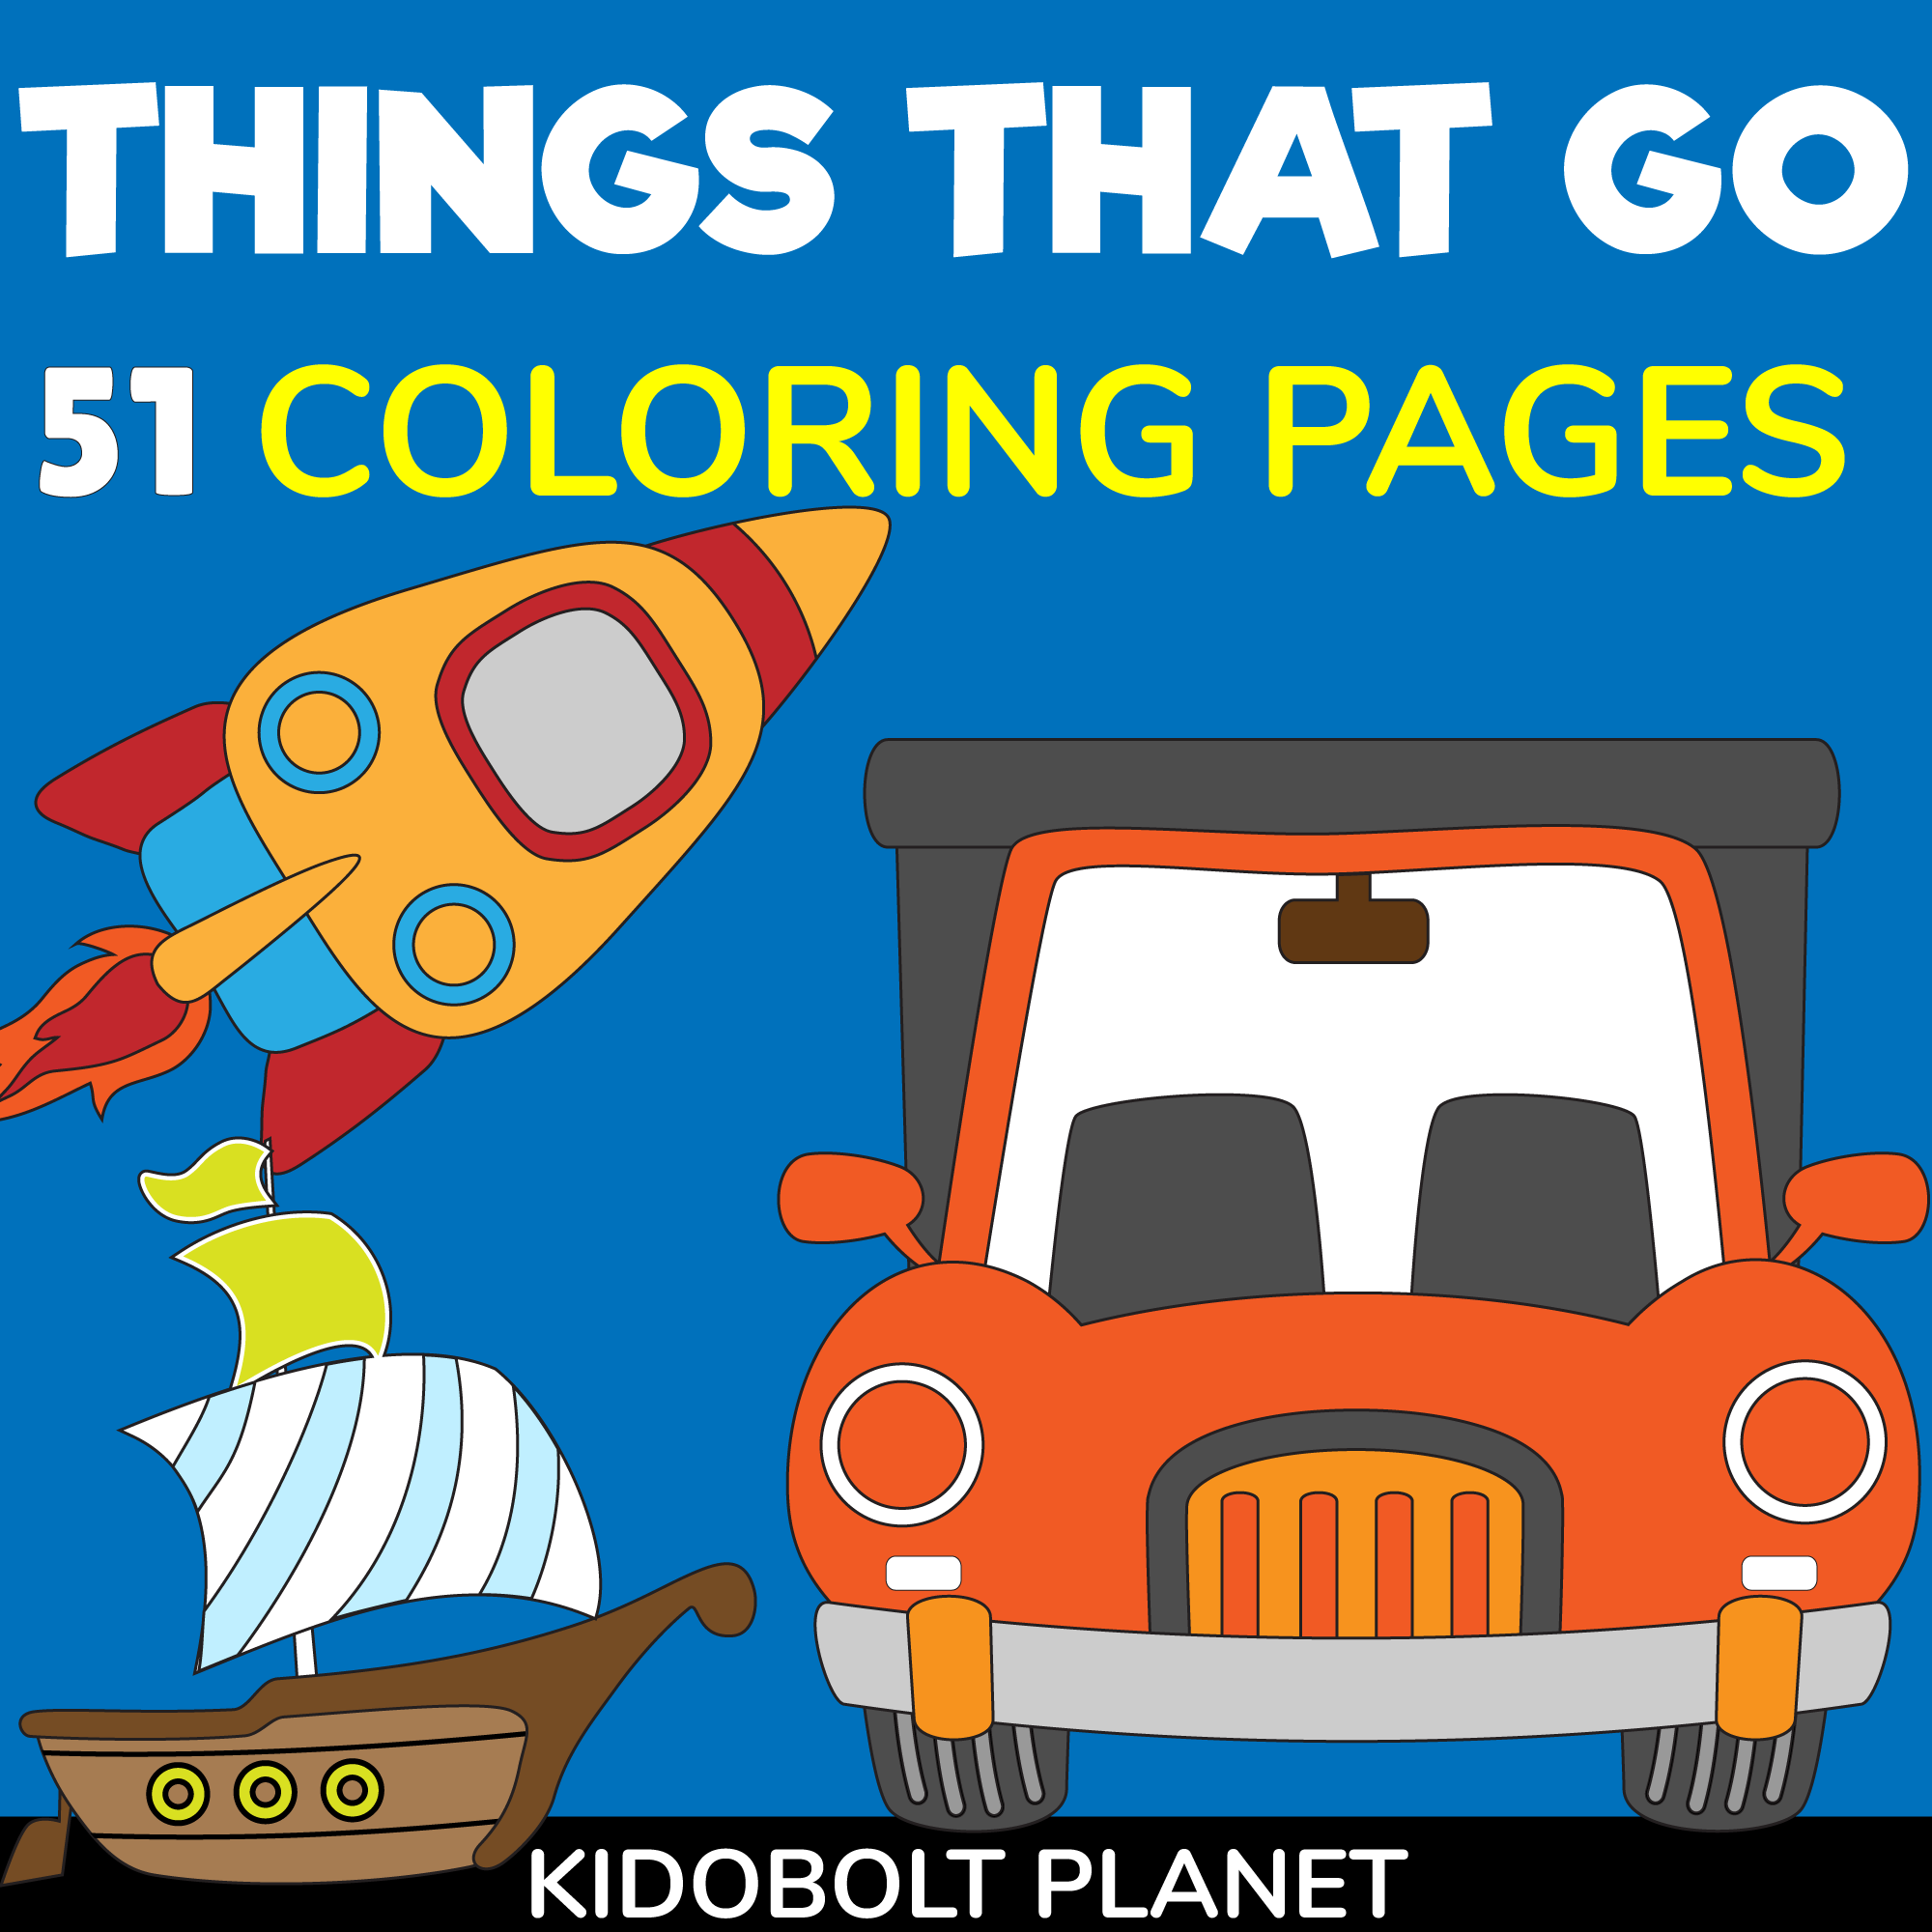 Things that go coloring pages made by teachers